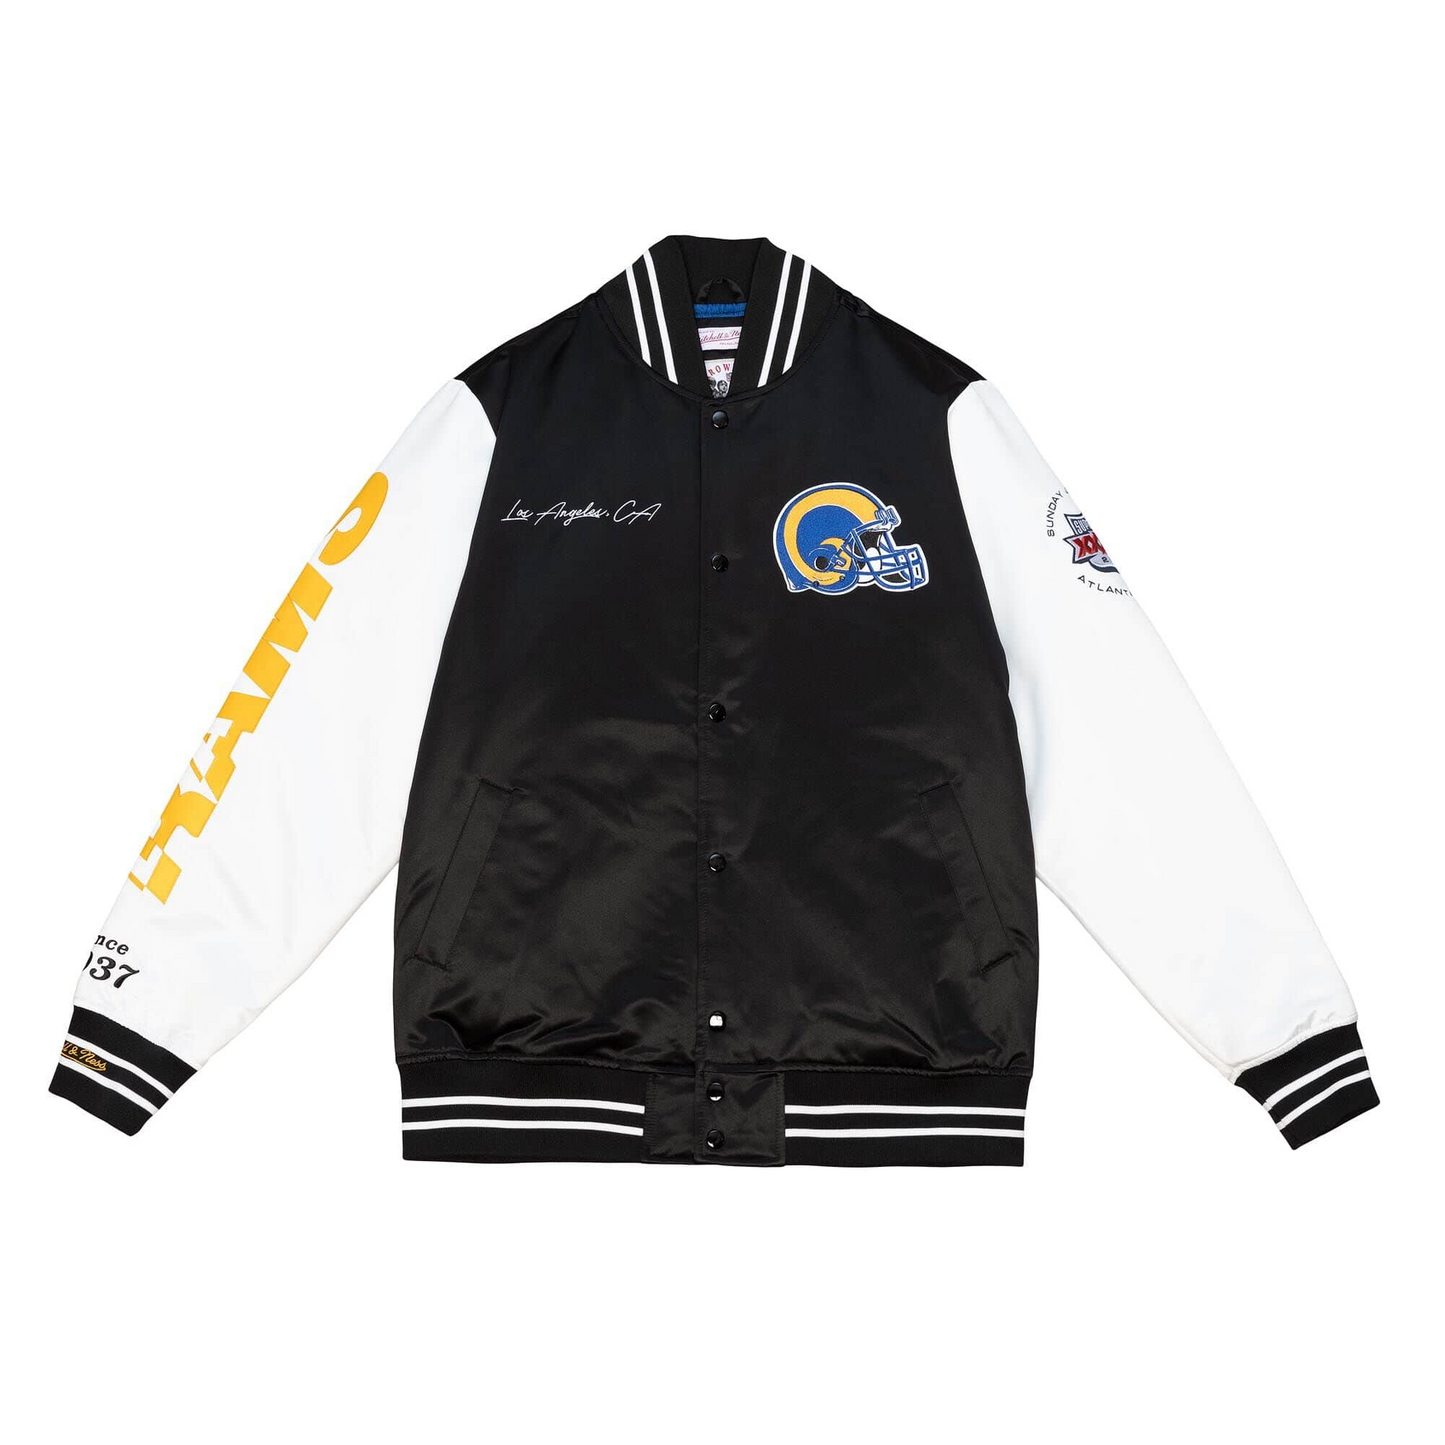 LA Lakers White and Red Satin Jacket